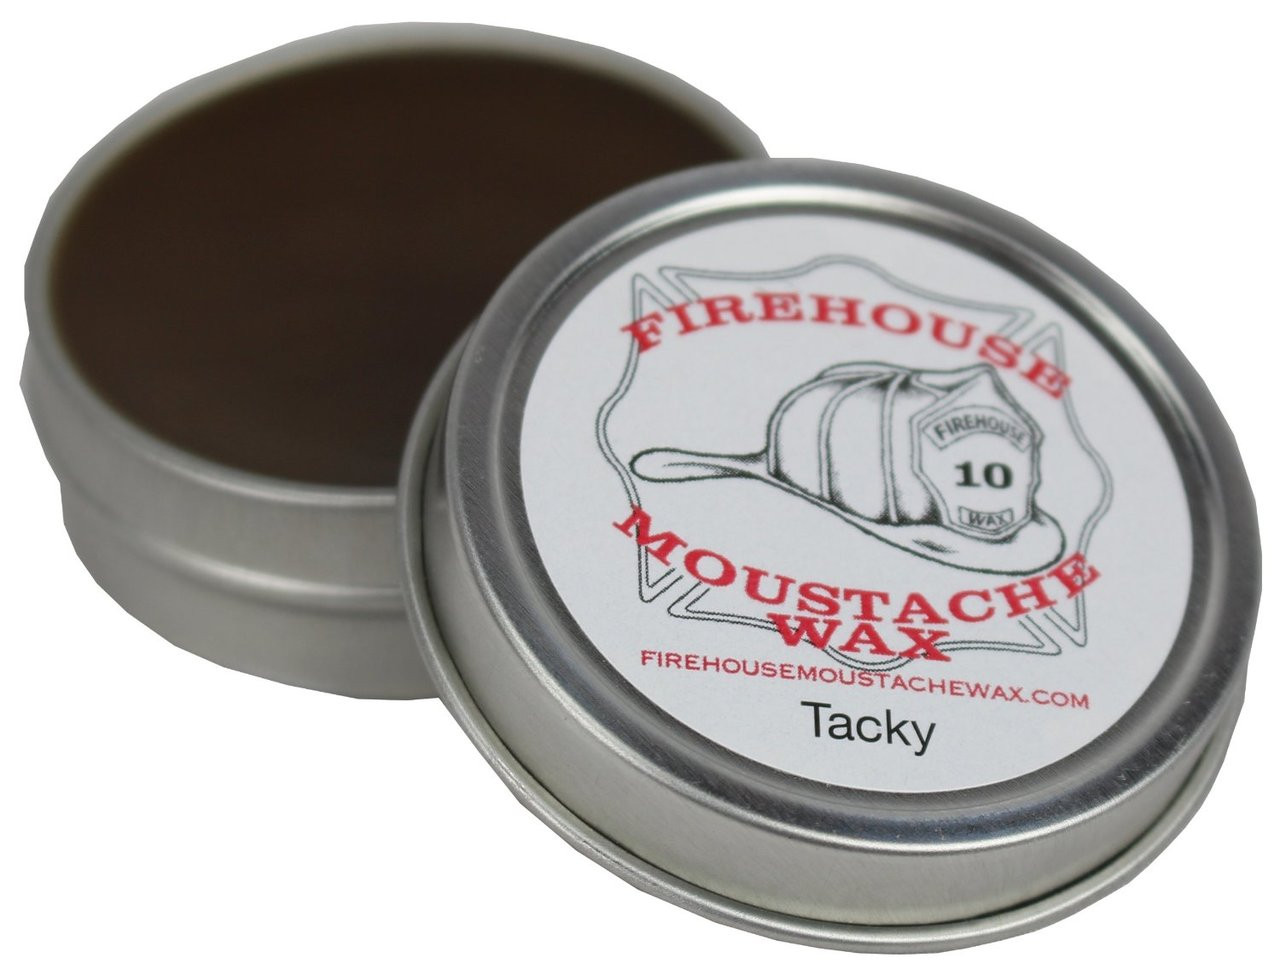 Tacky Wax Keeps Collectibles Safe and Secure - 6 oz. Tub